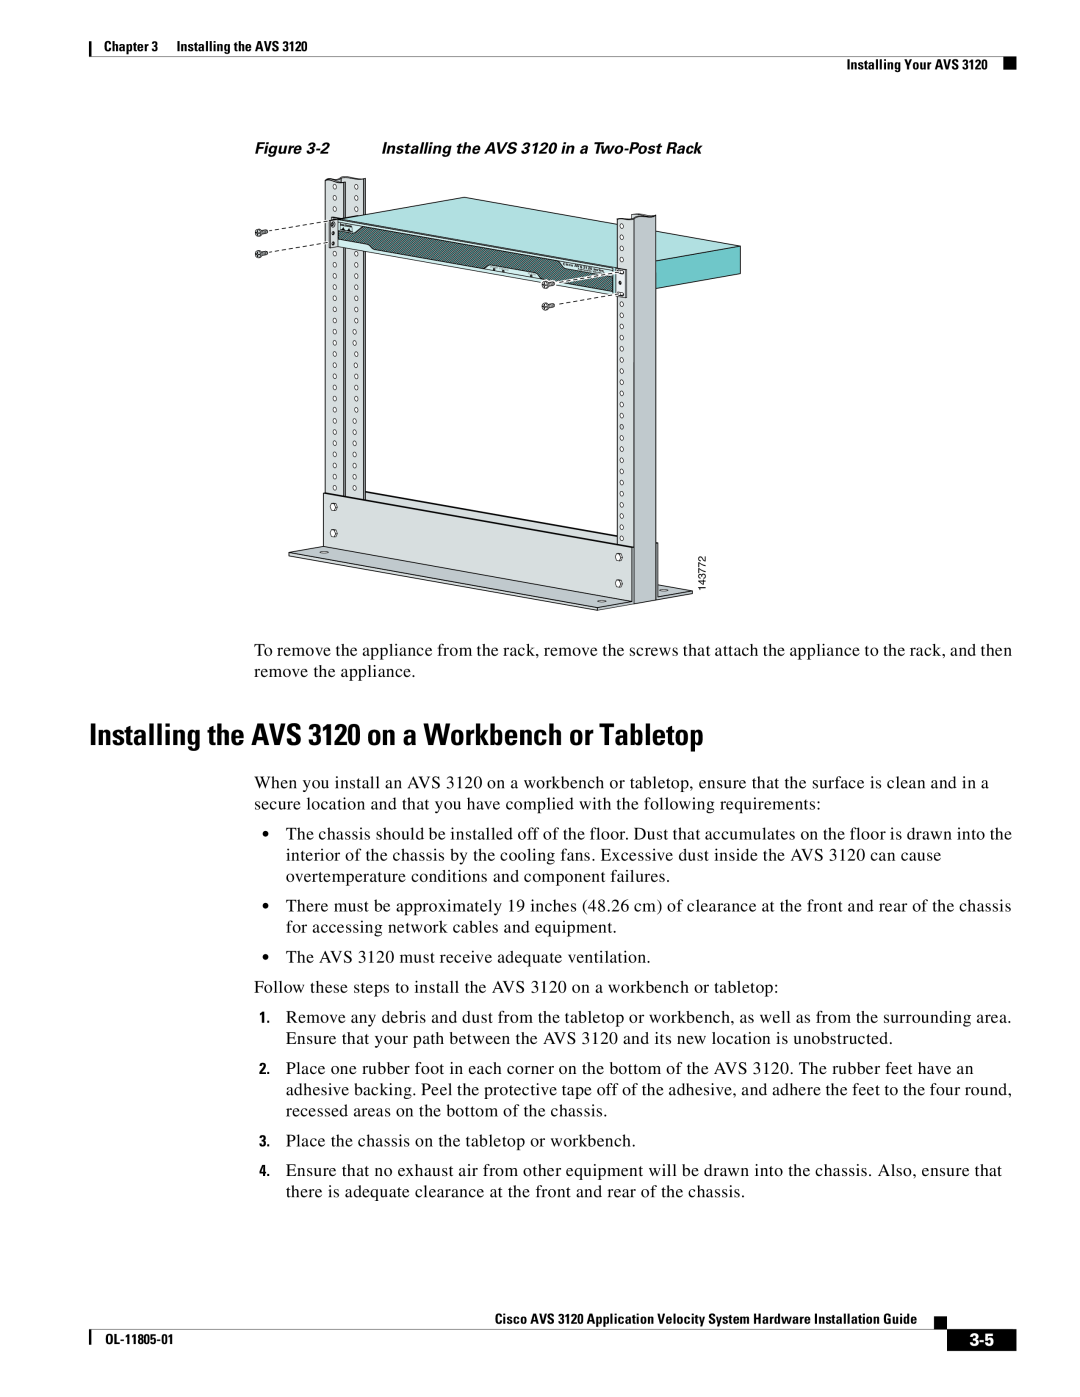 Cisco Systems installation instructions Installing the AVS 3120 on a Workbench or Tabletop 